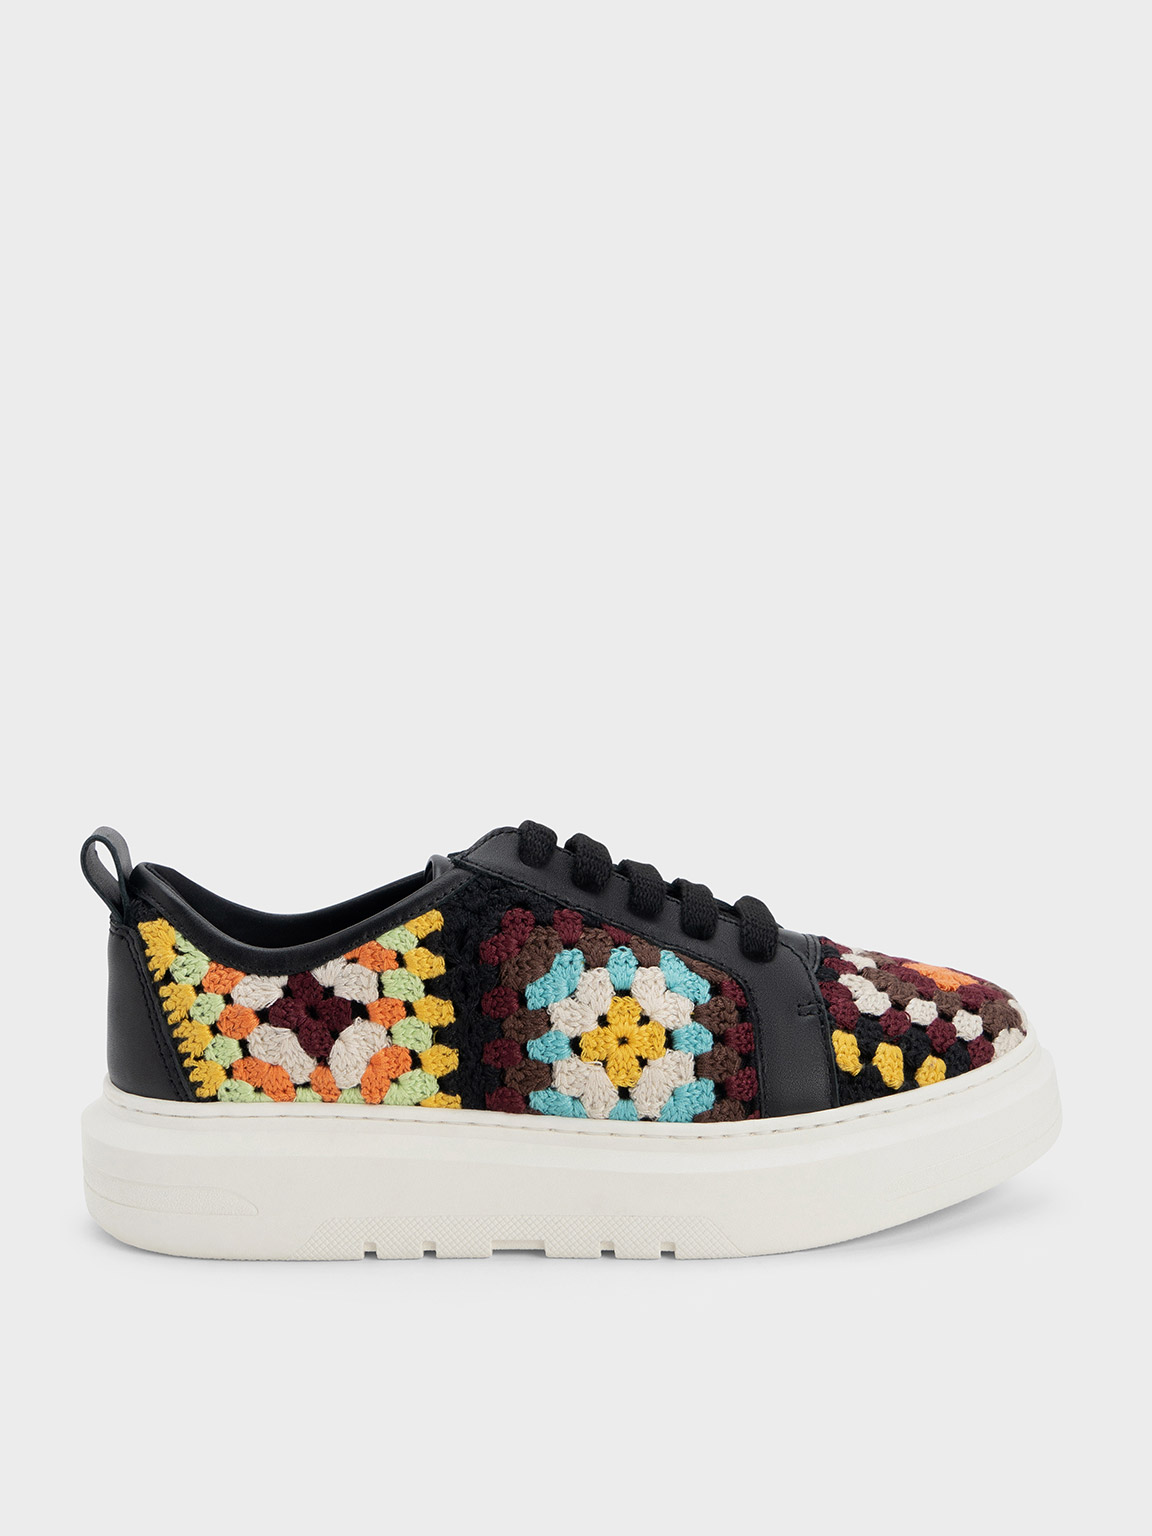 Charles & Keith - Floral Crochet & Leather Sneakers In Multi